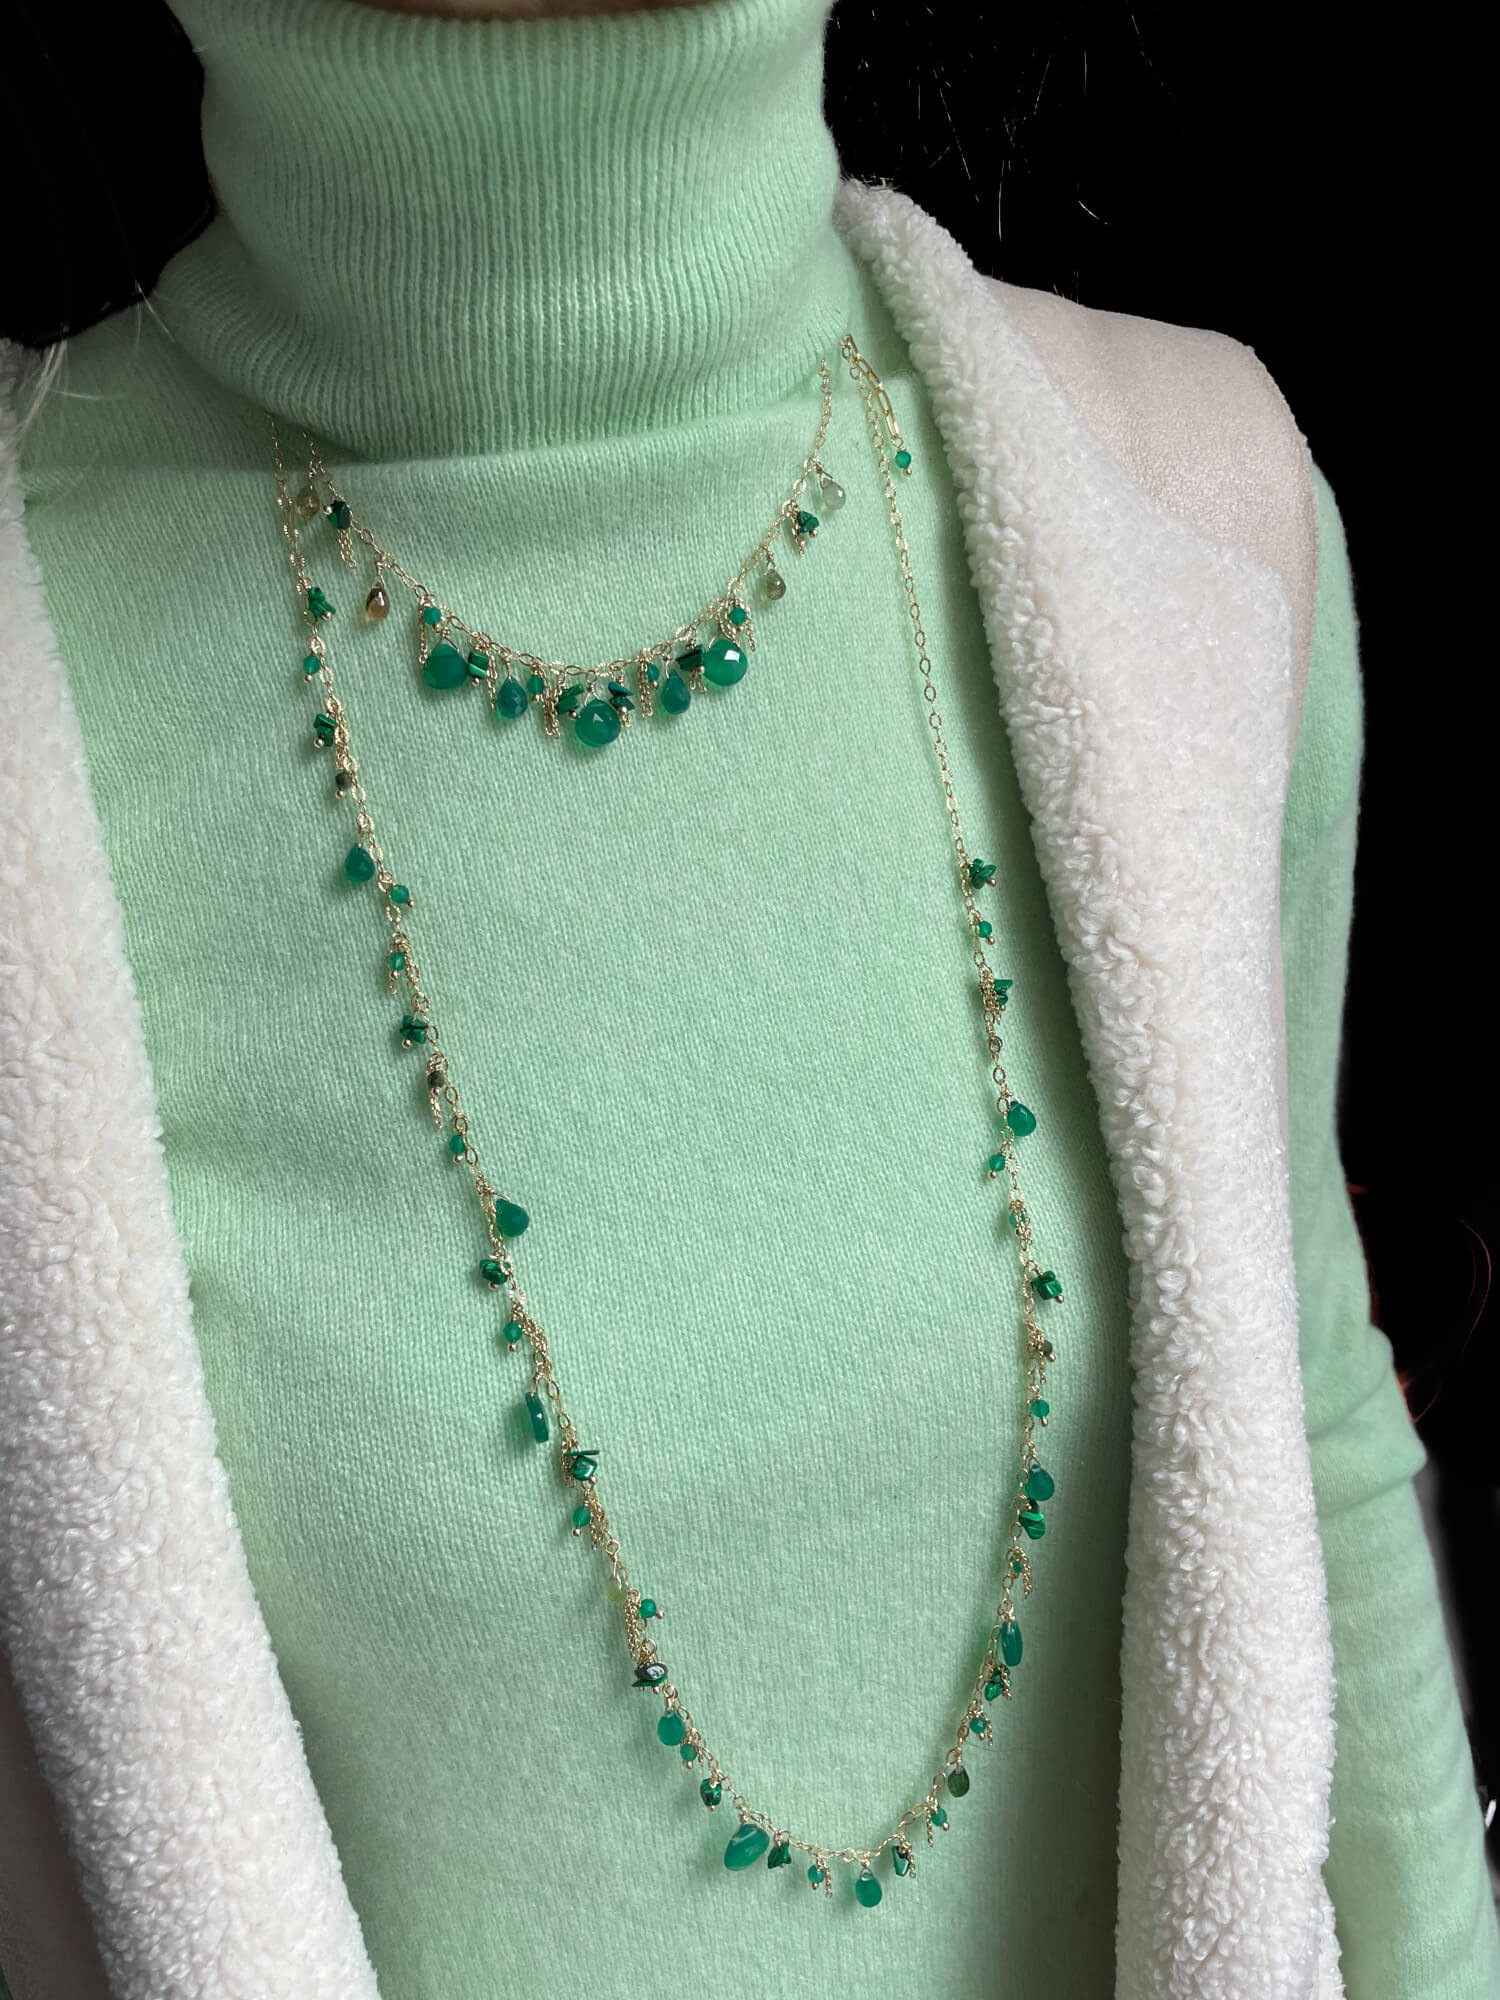 Long gold necklace with green gems